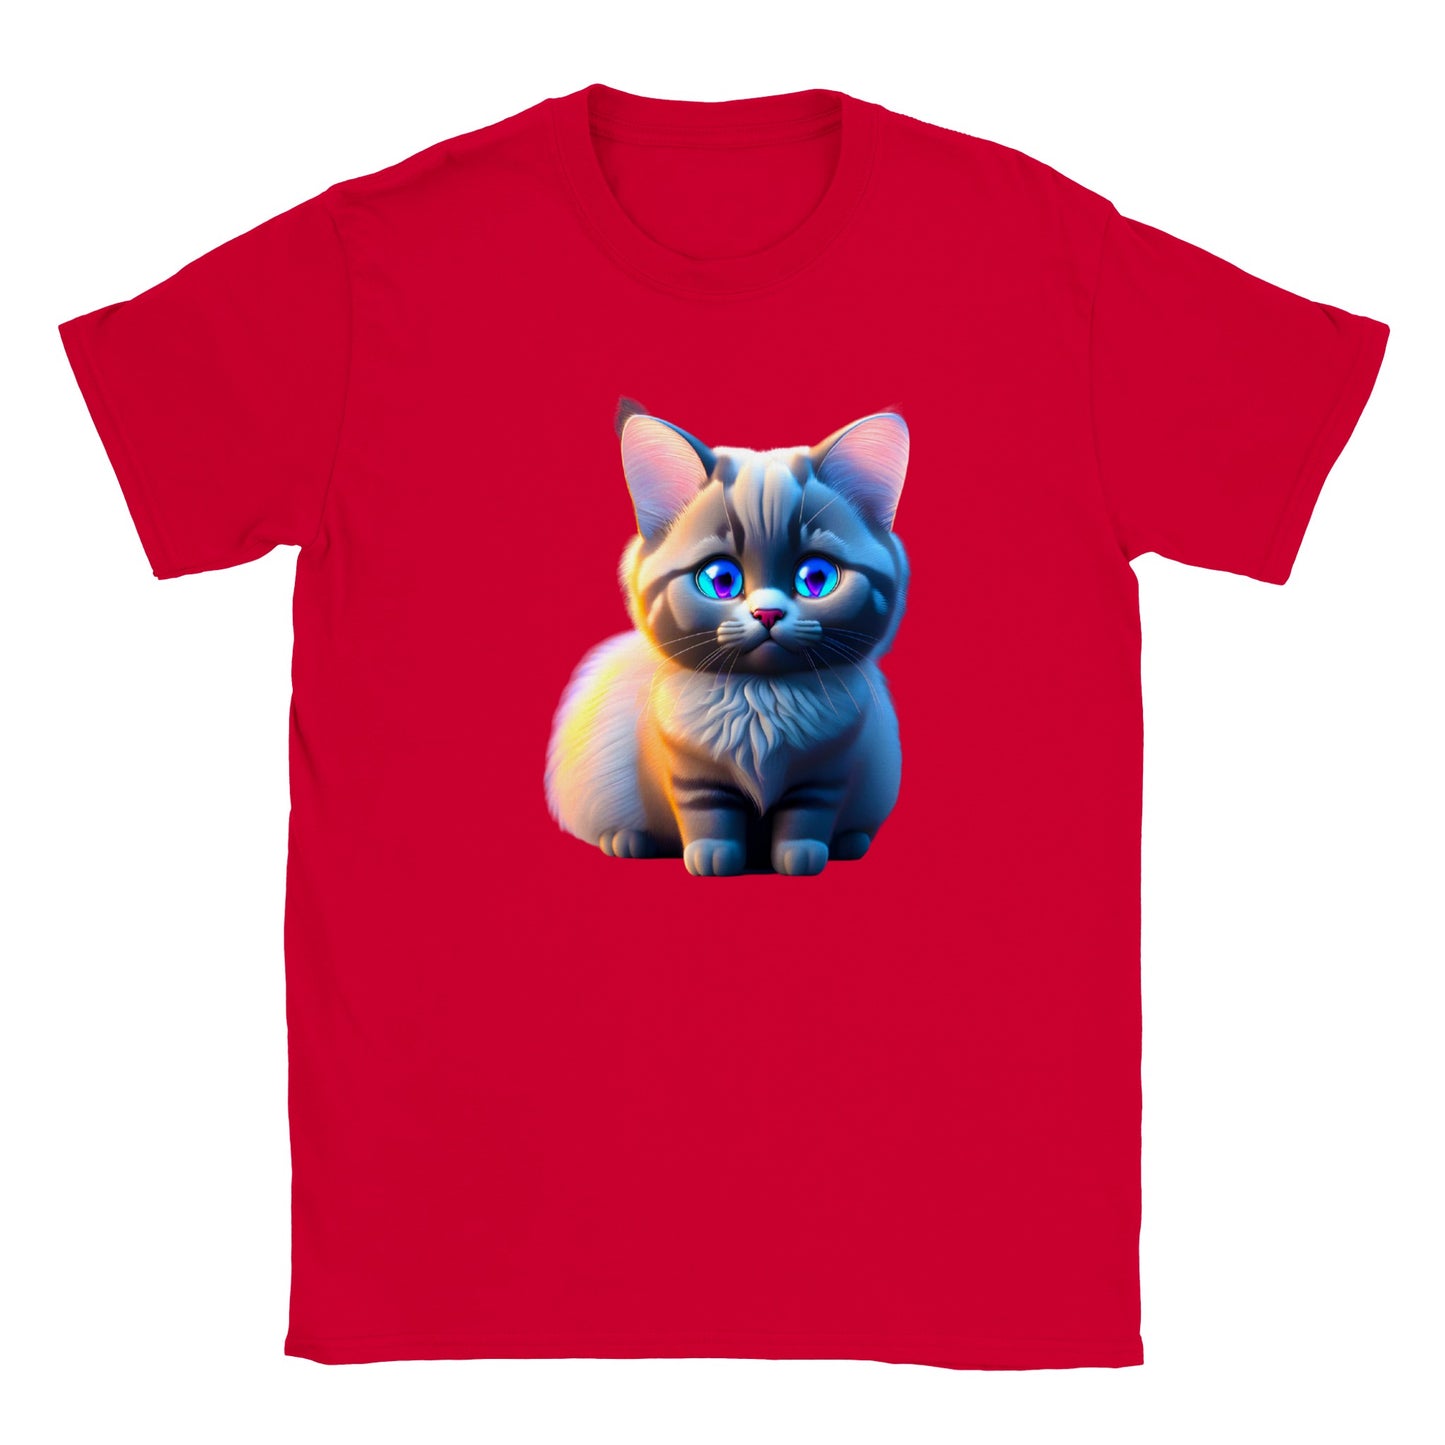 Adorable, Cool, Cute Cats and Kittens Toy - Classic Kids Crewneck T-Shirt 19